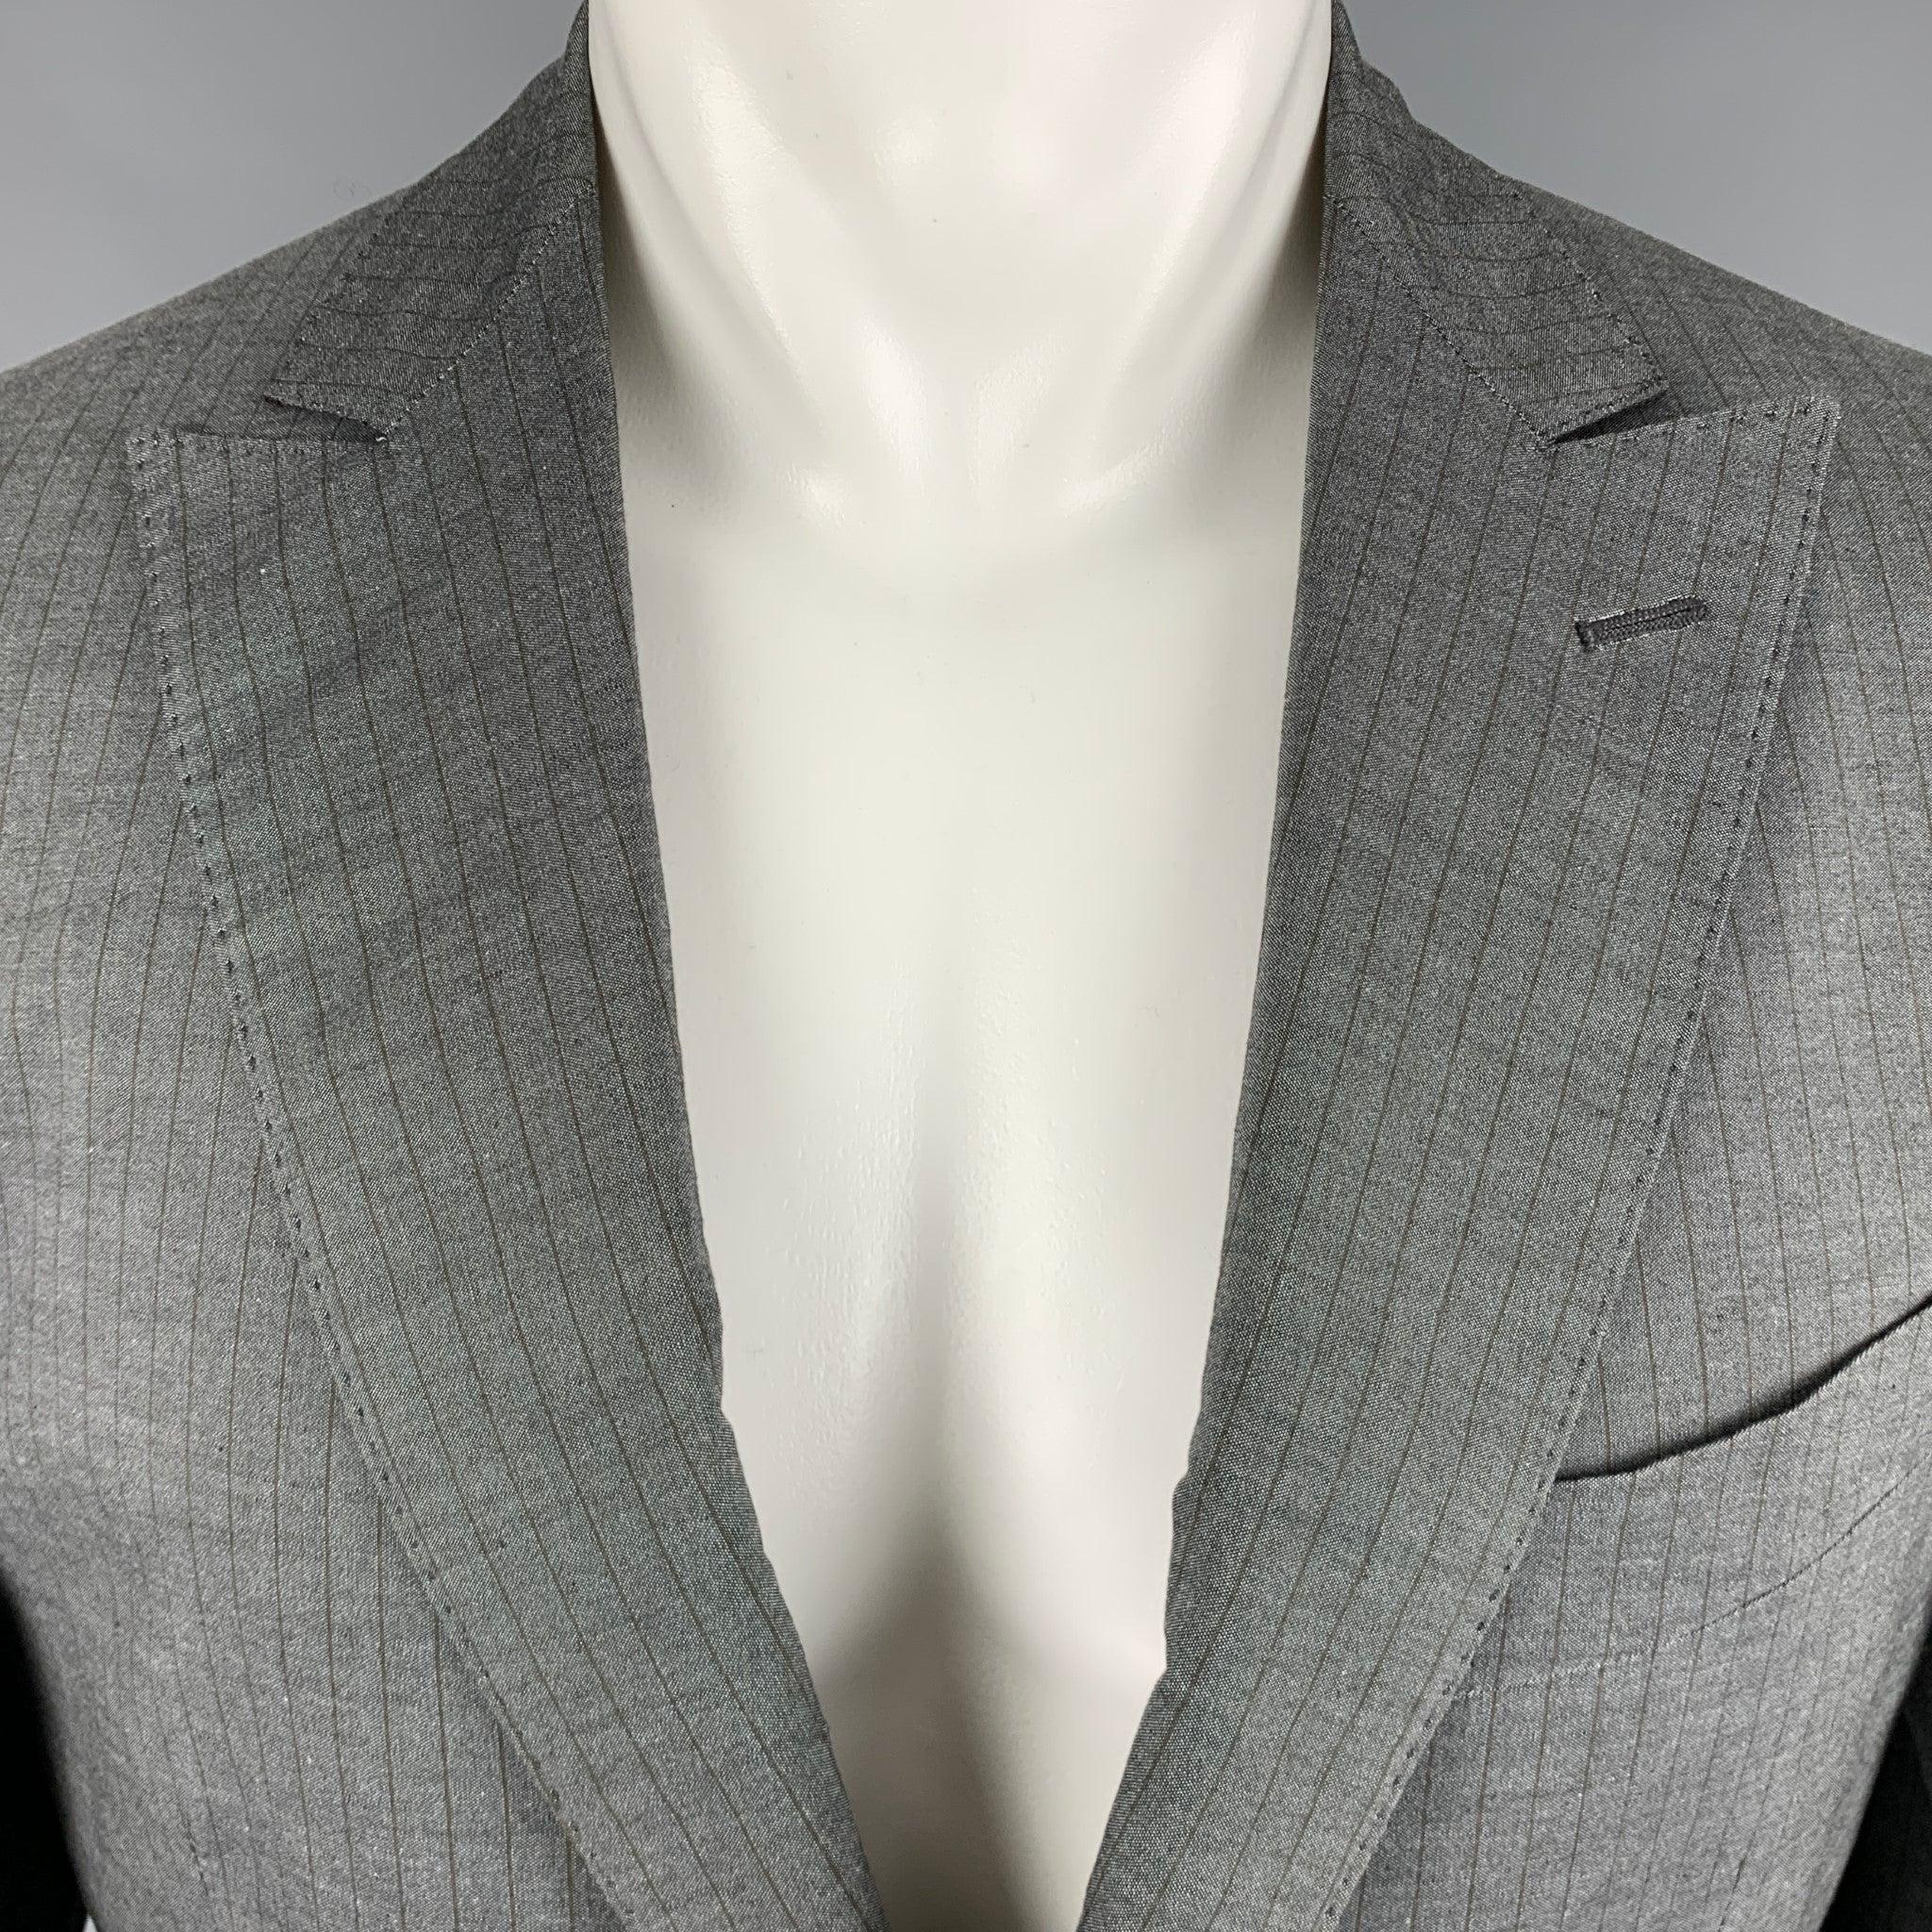 ETRO sport coat
in a grey cotton fabric featuring brown stripes, a single breasted style, peak lapel, and double button closure. Made in Italy.Excellent Pre-Owned Condition. 

Marked:   50 

Measurements: 
 
Shoulder: 18 inches Chest: 40 inches